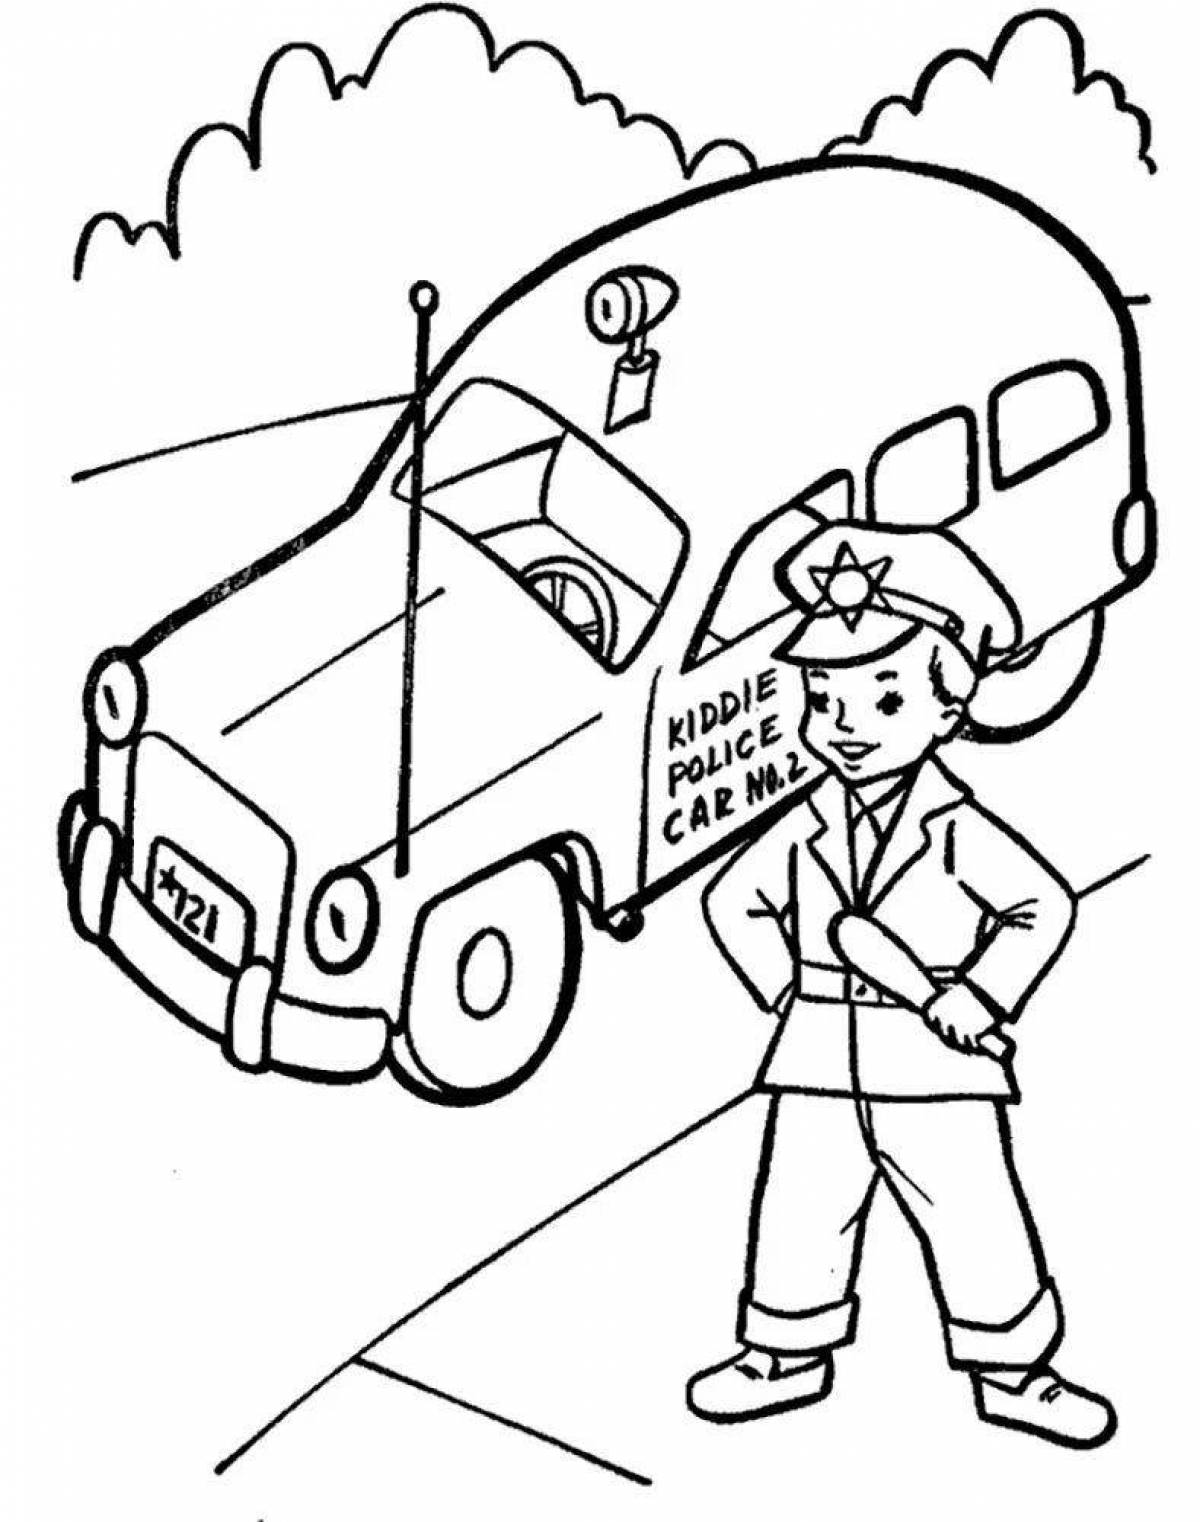 Coloring page poised who protect us